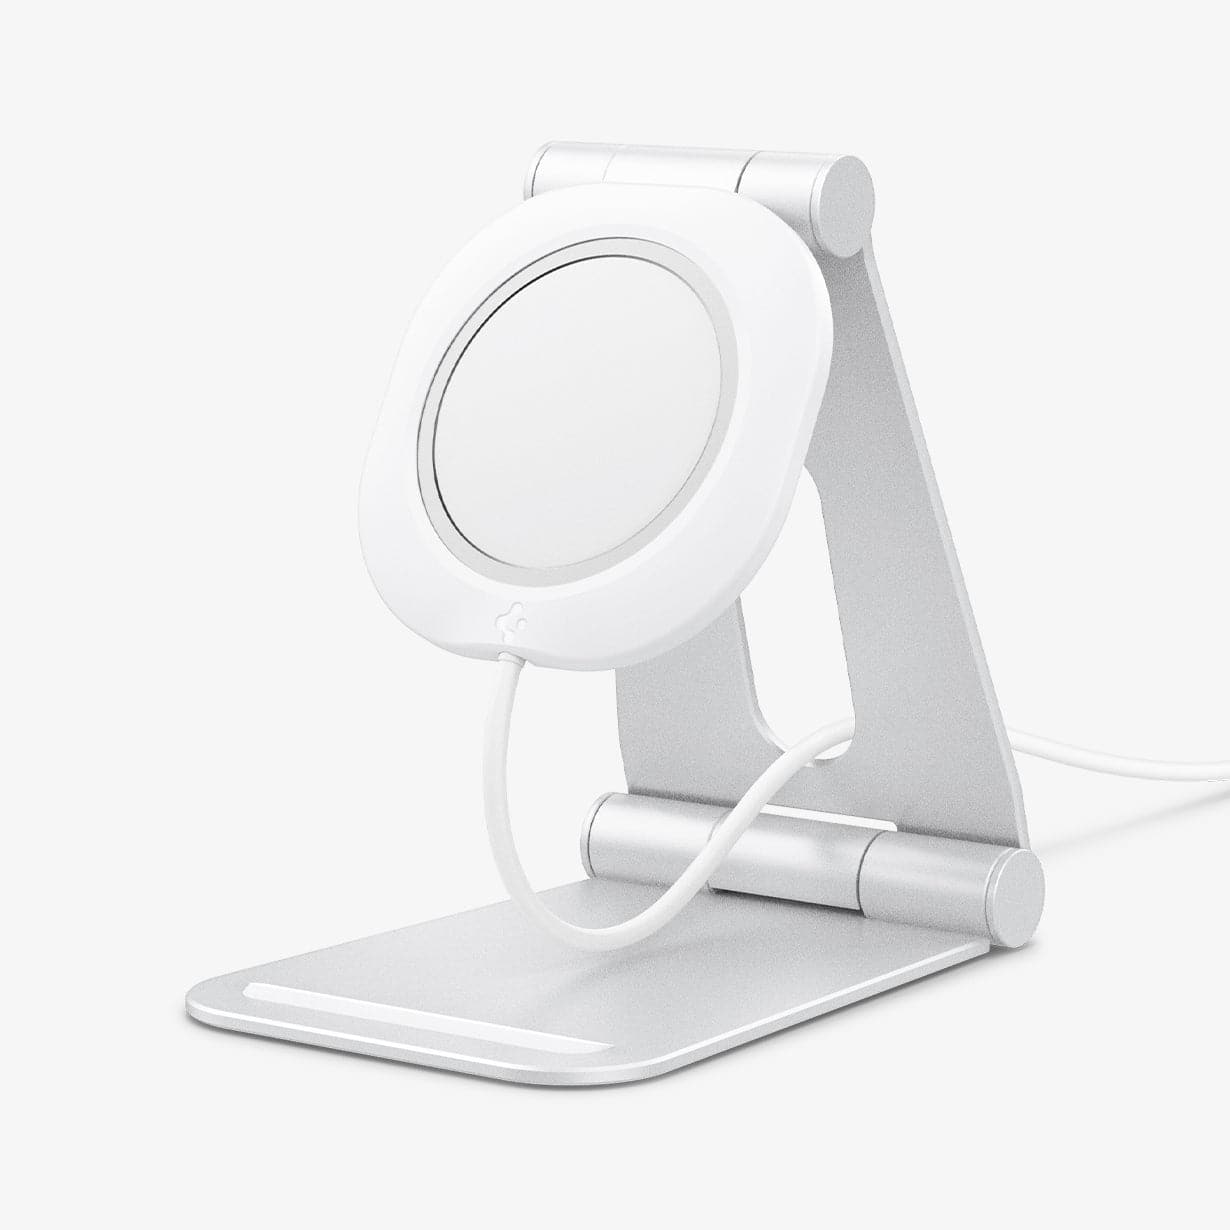 AMP02673 - MagFit Charger Stand (MagFit) in white showing the front and partial side